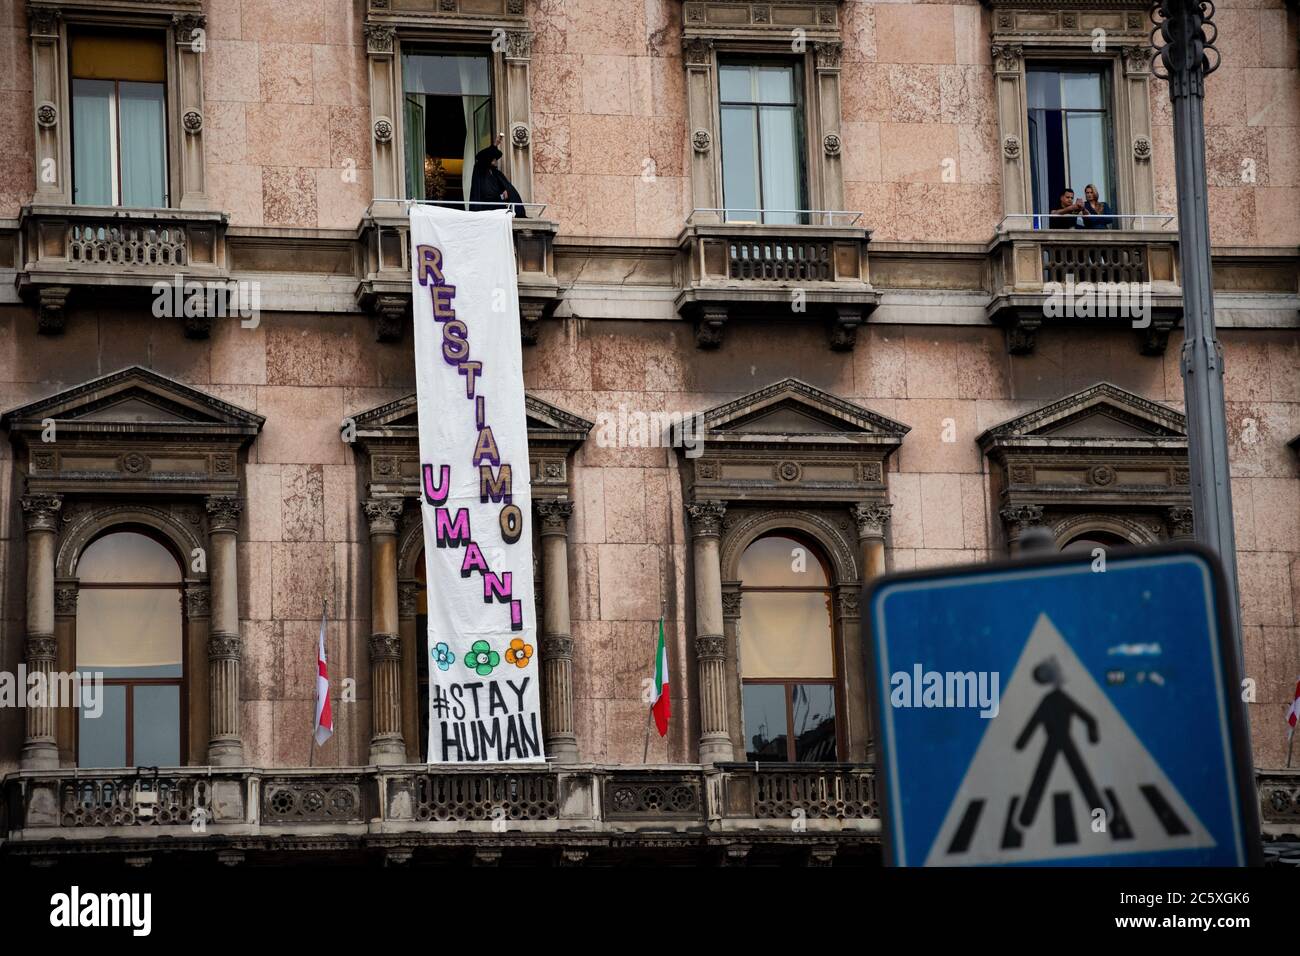 On a balcony above the 'Piazza del Duomo' an activist wearing a Zorro costume showing a protest banner during a political meeting with Matteo Salvini. Stock Photo